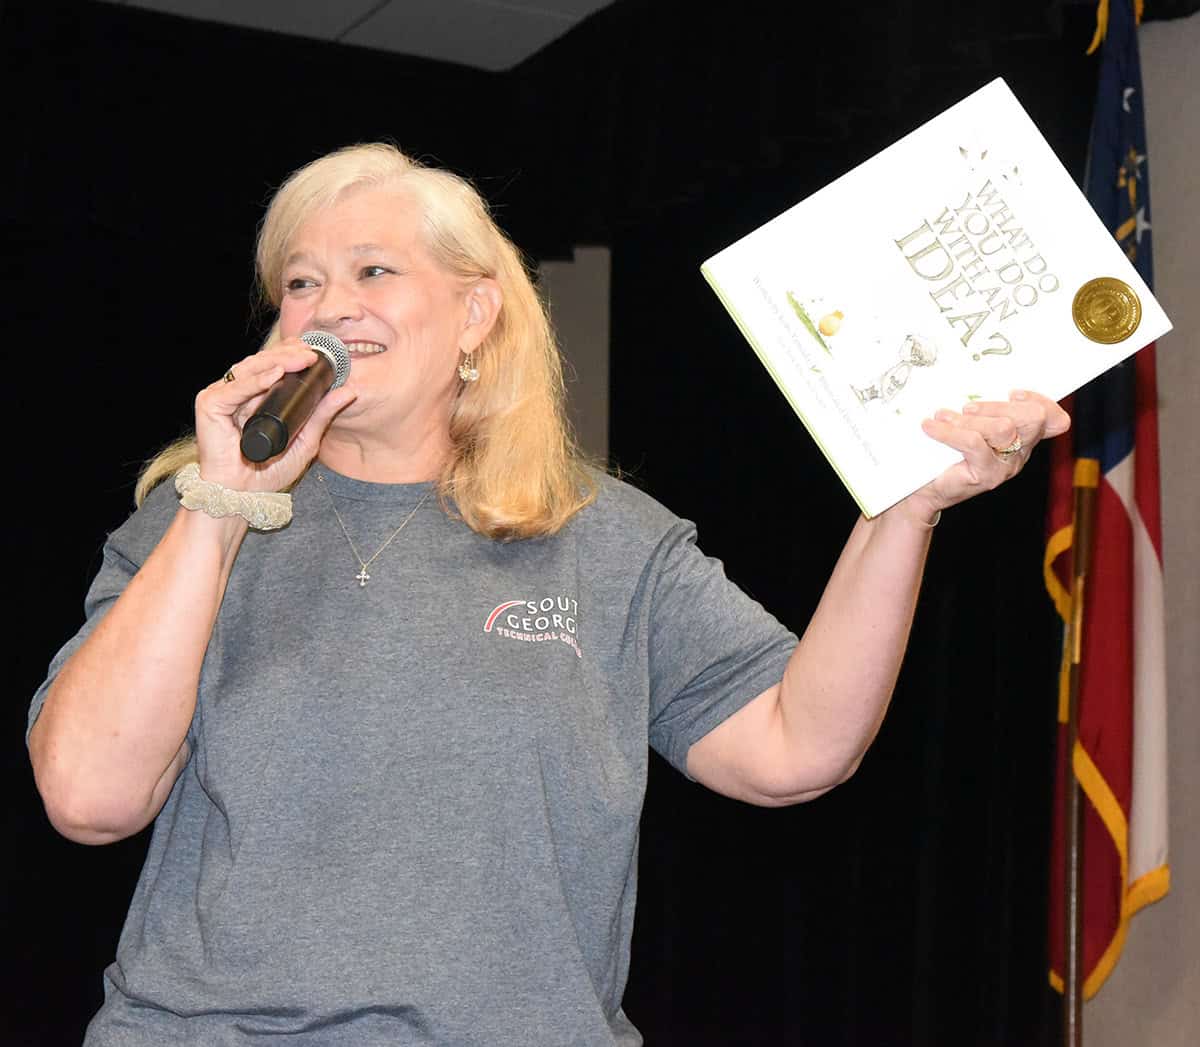 Heidi Gooden of Chattahoochee Flint RESA is shown above showing parents the book “What Do You Do With An Idea?” that each of the STEM campers received as part of participating in the week-long STEM camp at South Georgia Tech.